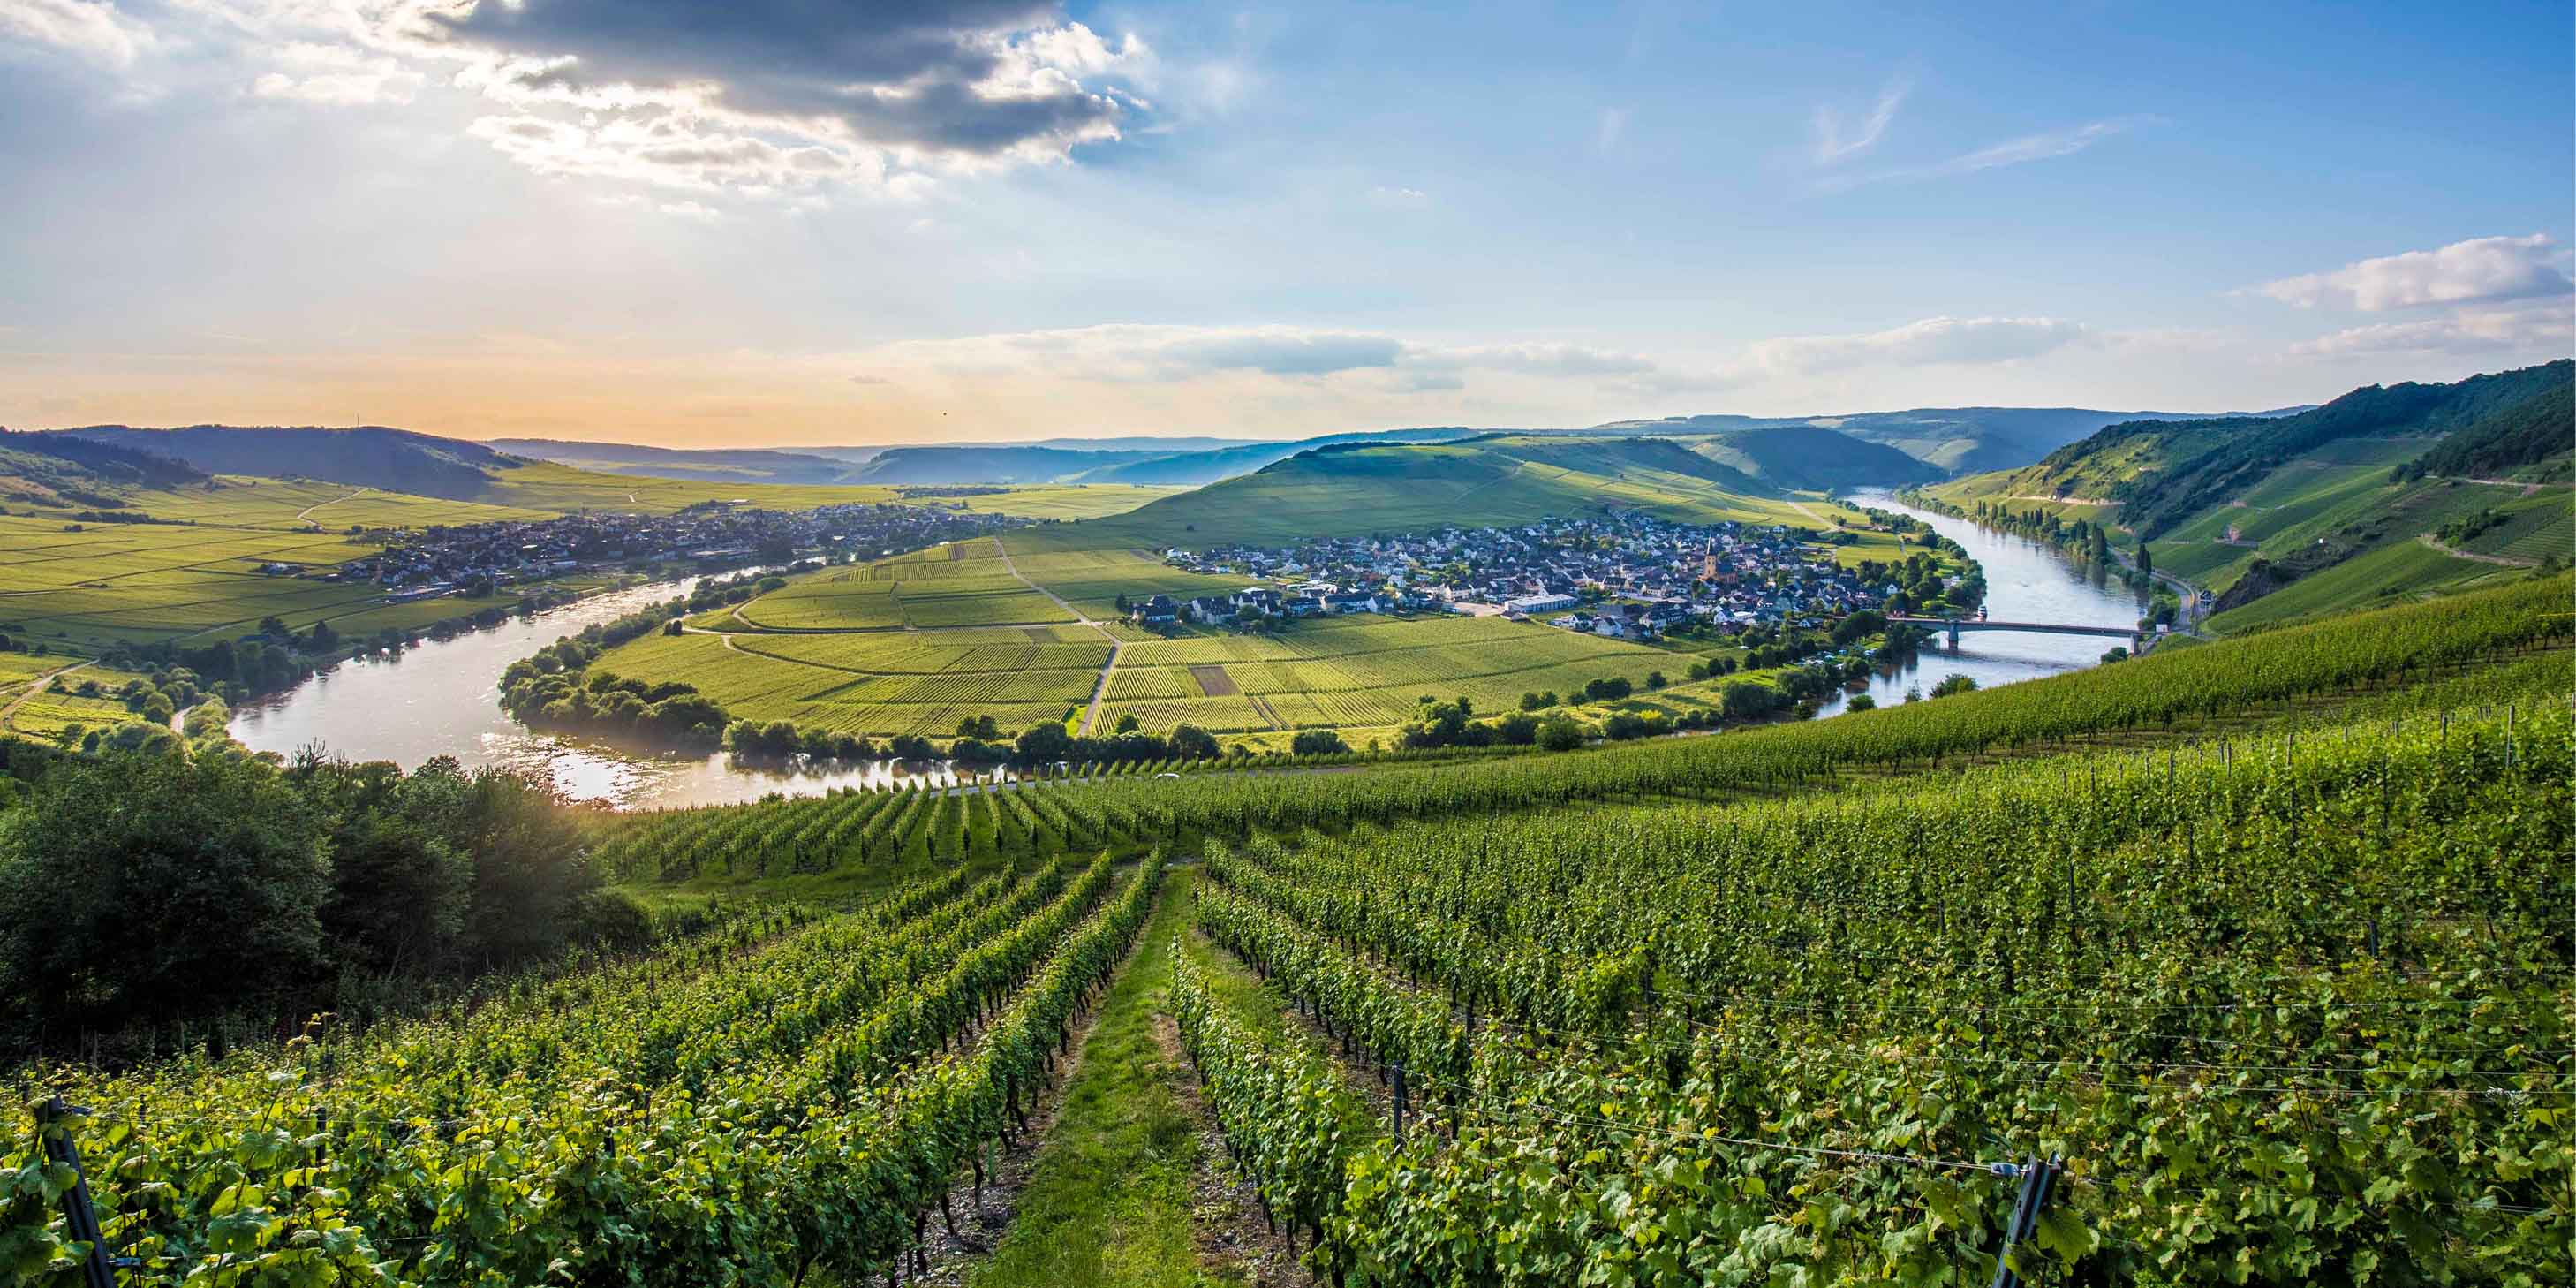 The Moselle River loop, with views of the town and vineyards at sunrise